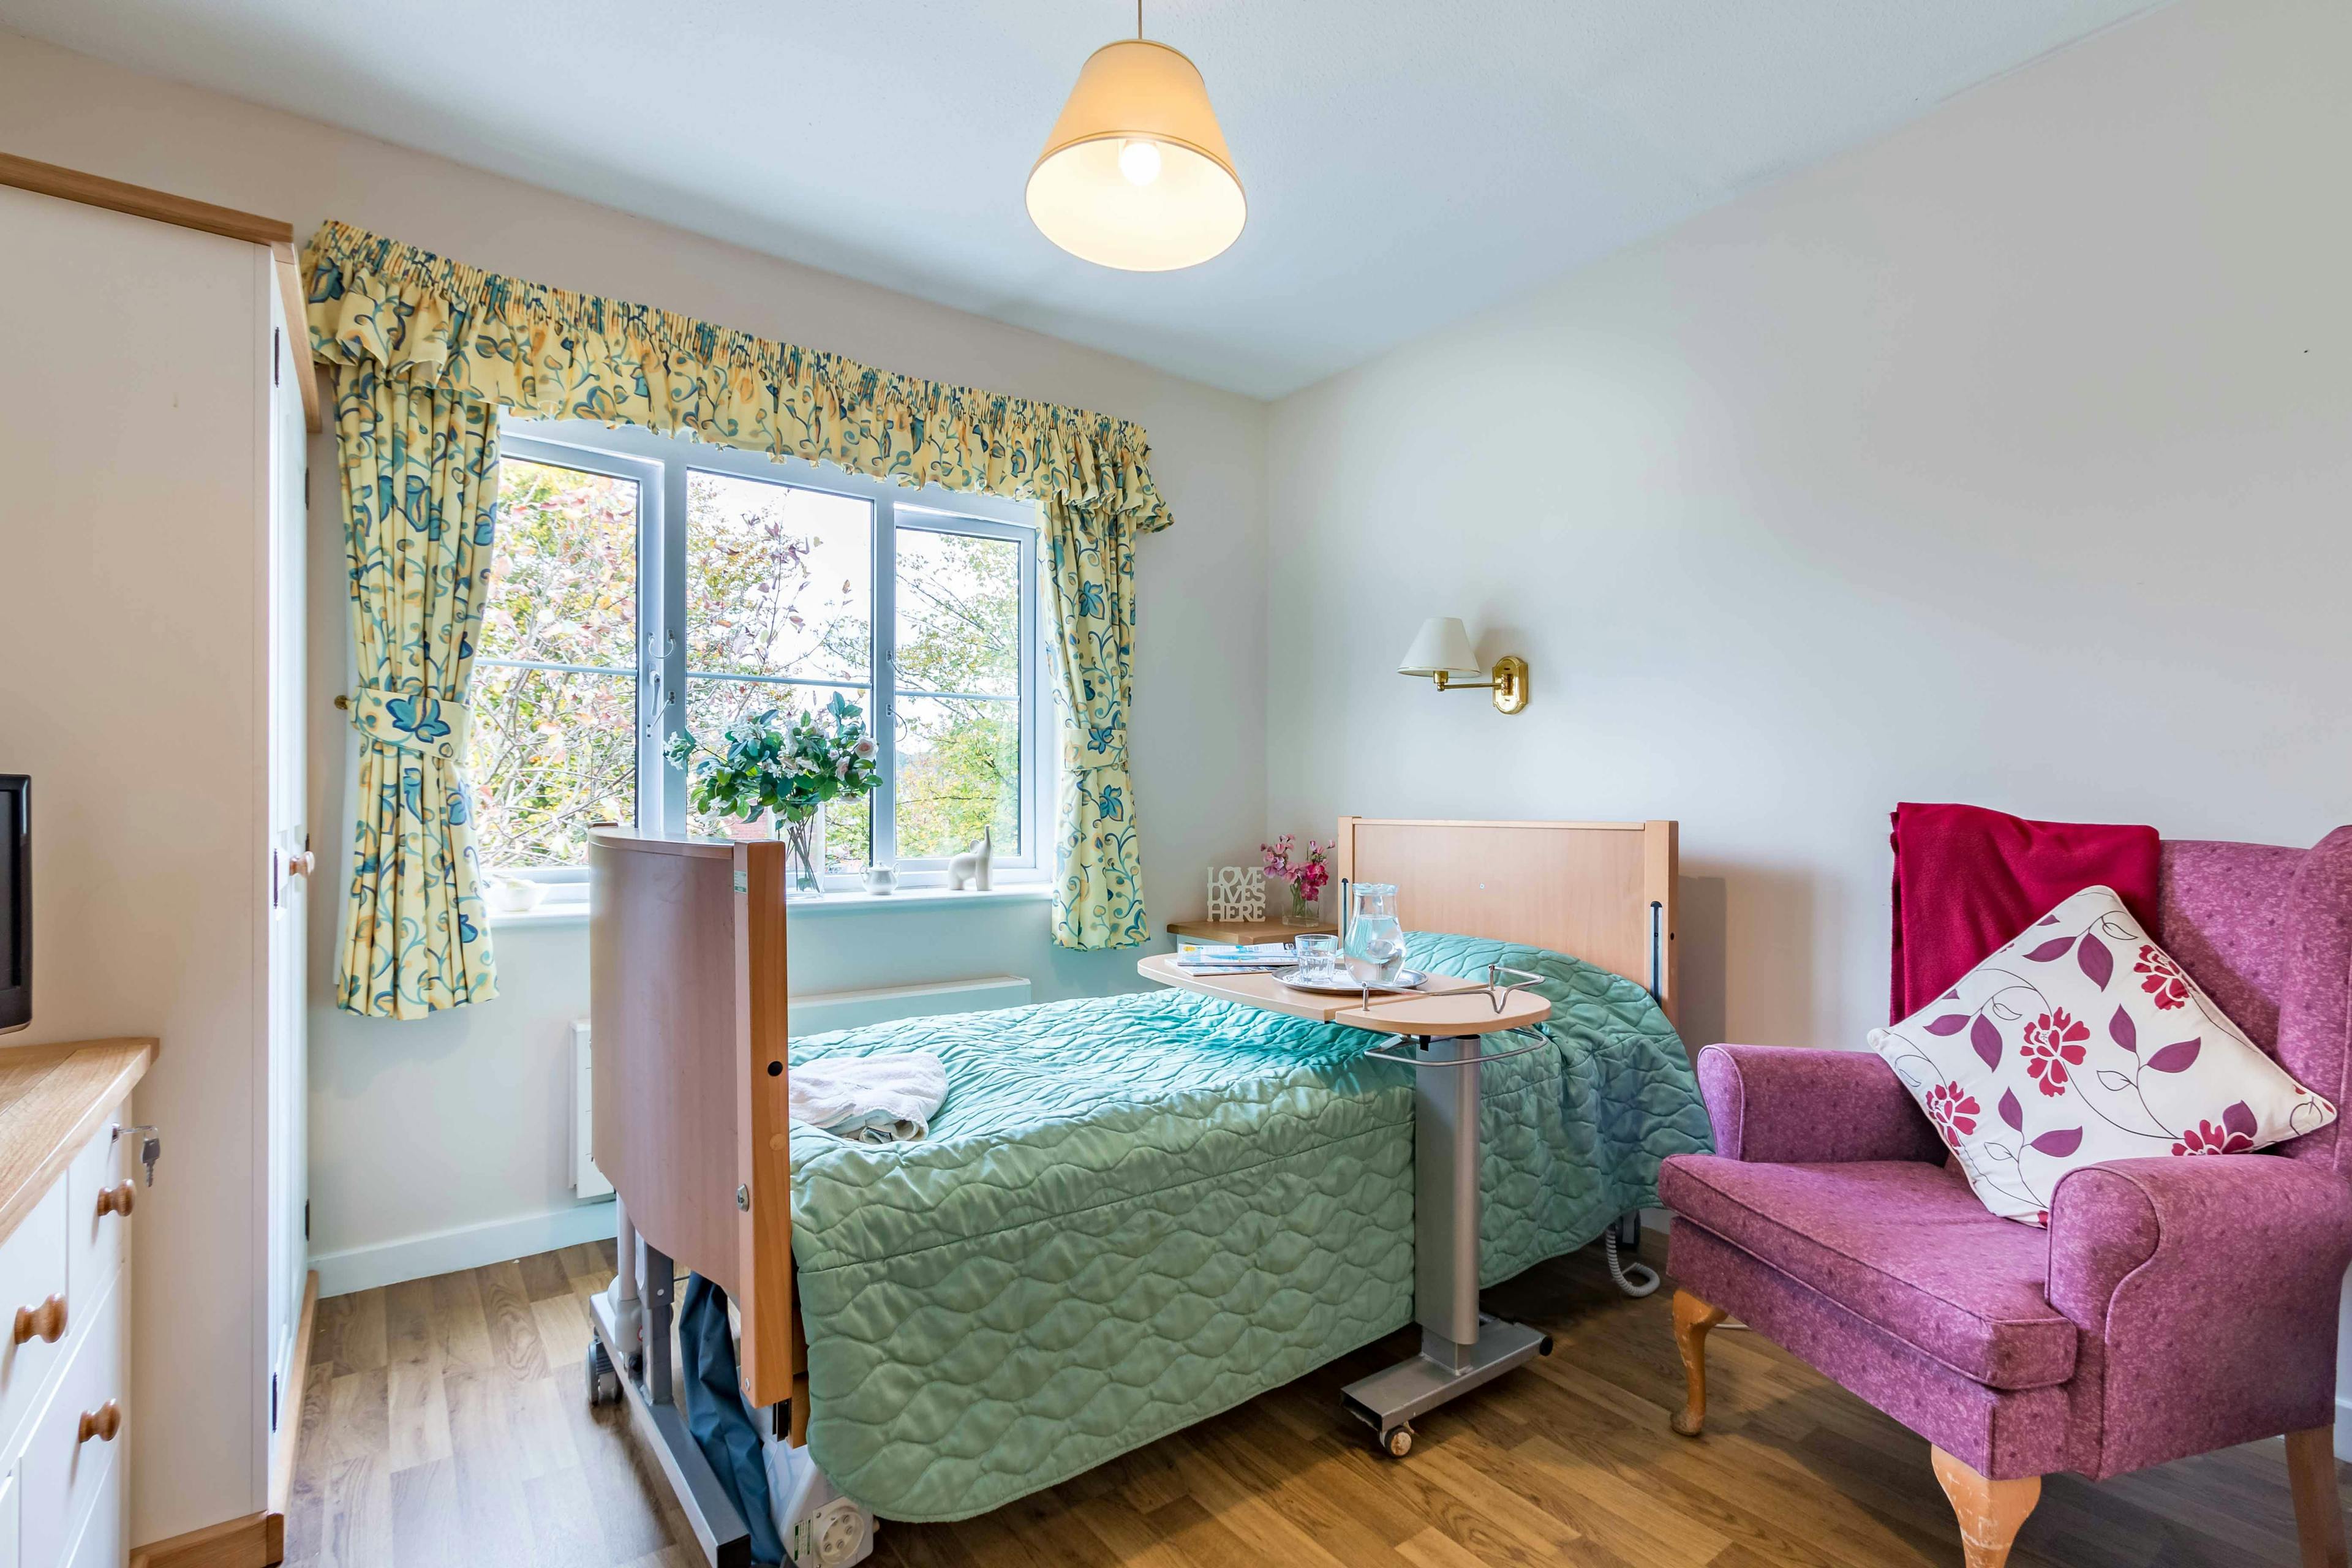 Bedroom at Shelburne Lodge Care Home in High Wycombe, Buckinghamshire